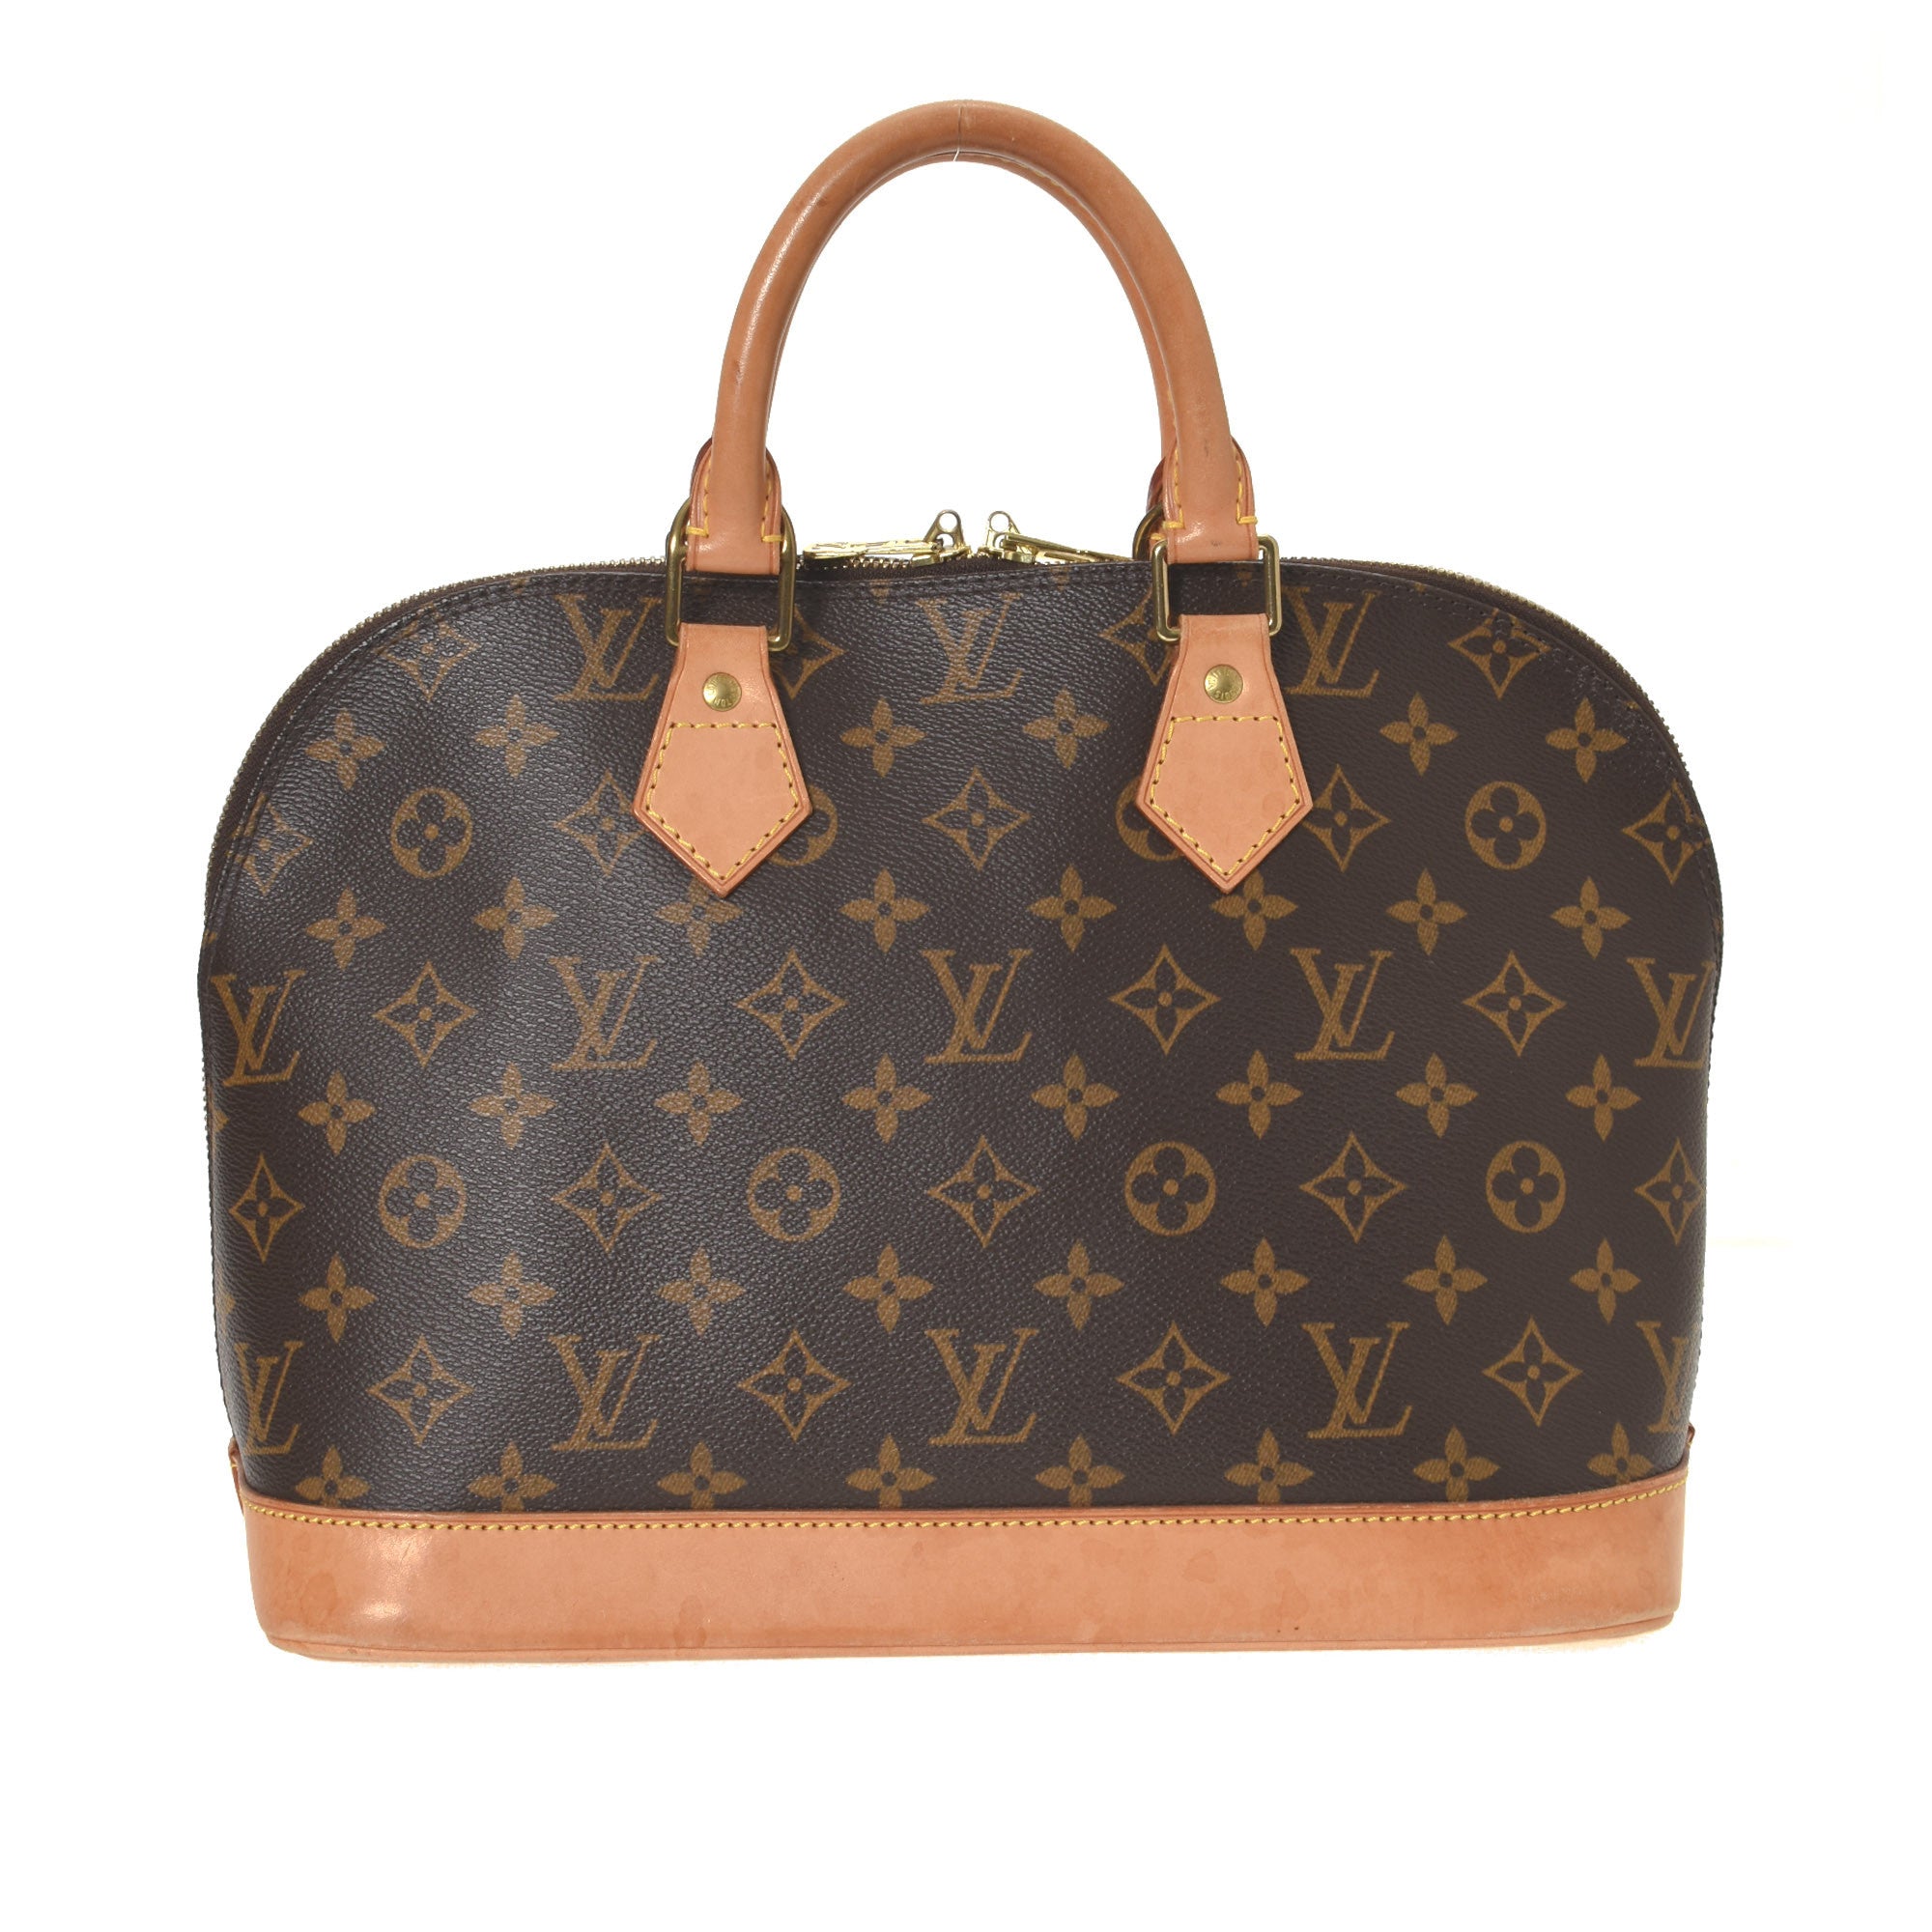 This or That! Hermes Evelyne PM vs LV Odeon PM 